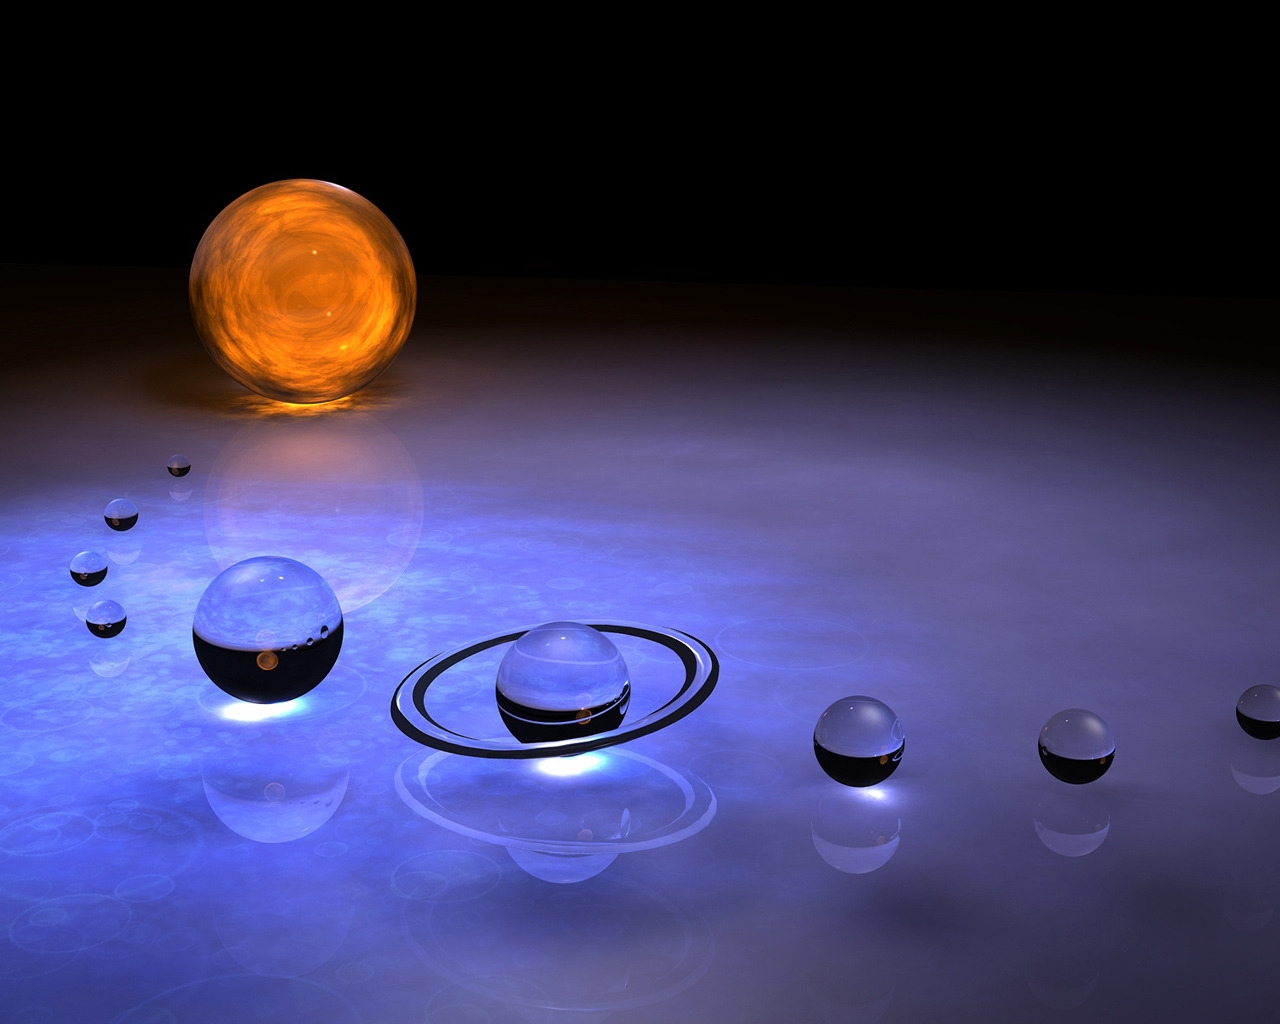 Solar System for 1280 x 1024 resolution